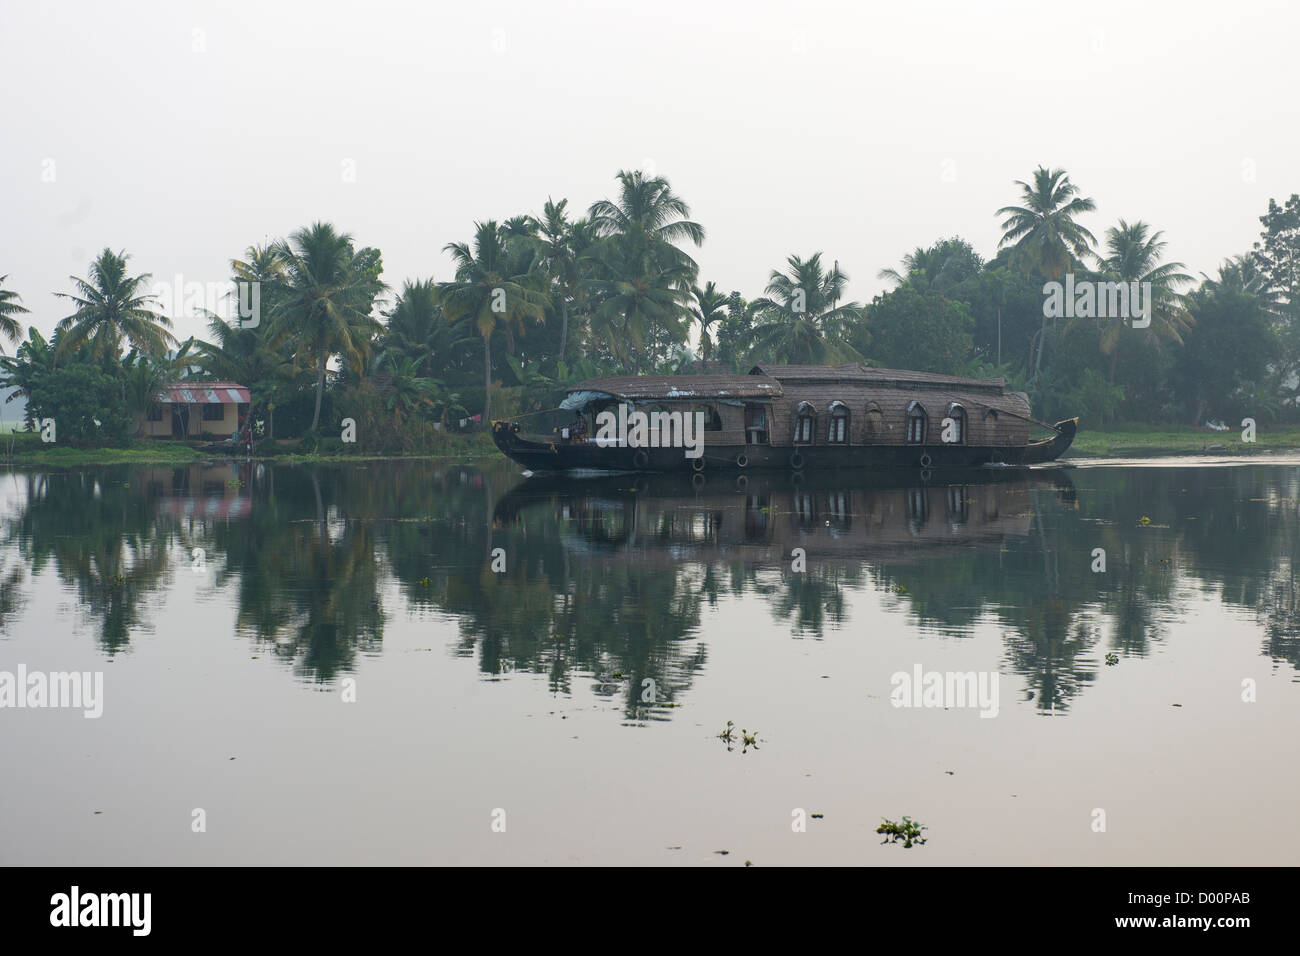 Tourist rice barge passing reflections on the West Coast Canal (National Waterway No 3) at sunrise, Kanjippadom, near Alappuzha (Alleppey), Kerala, India Stock Photo